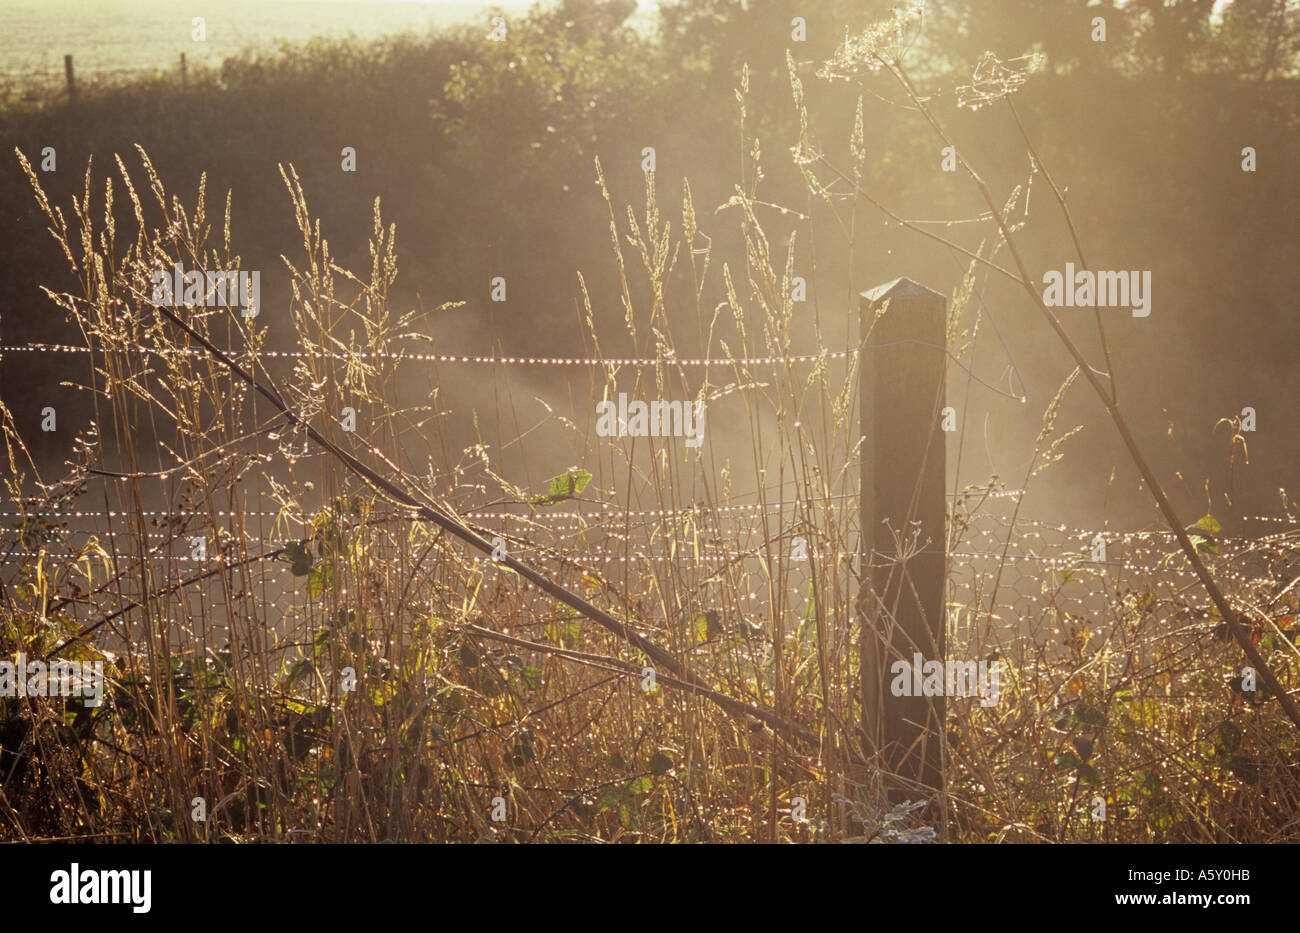 Atmospheric fence post and wire with mist rising above an embankment and dewy winter grasses Blackberry stems and Hogweed Stock Photo